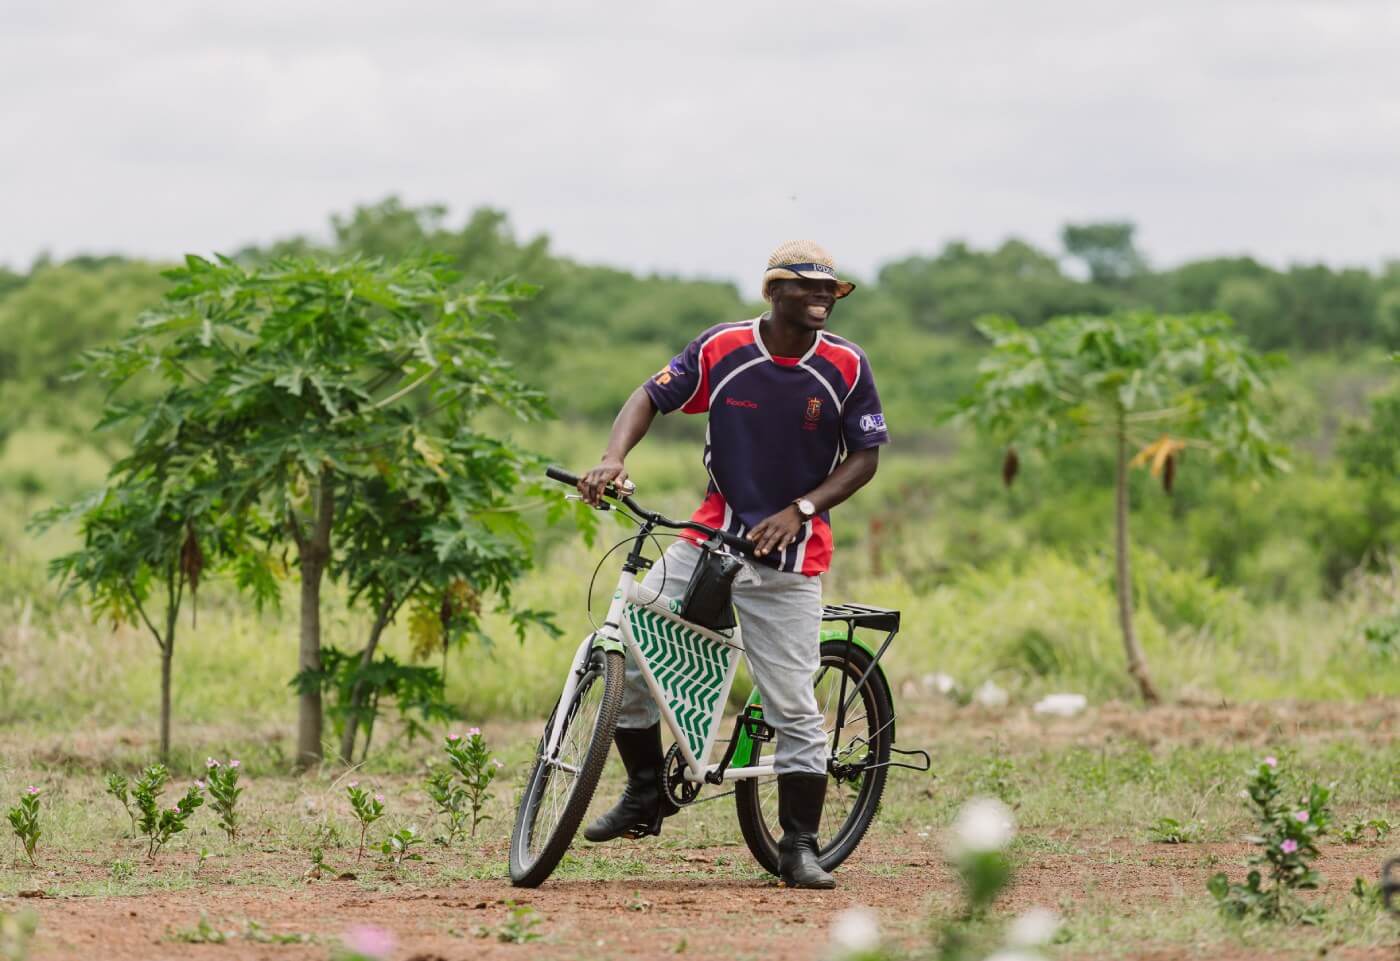 A photo-realistic image of a person wearing a blue and red jersey with a white stripe on the sleeves and a white baseball cap, riding on a green and white Mozambikes bicycle on a dirt path in a rural setting. The path is surrounded by small plants and trees, with a cloudy sky and tree line in the distance.